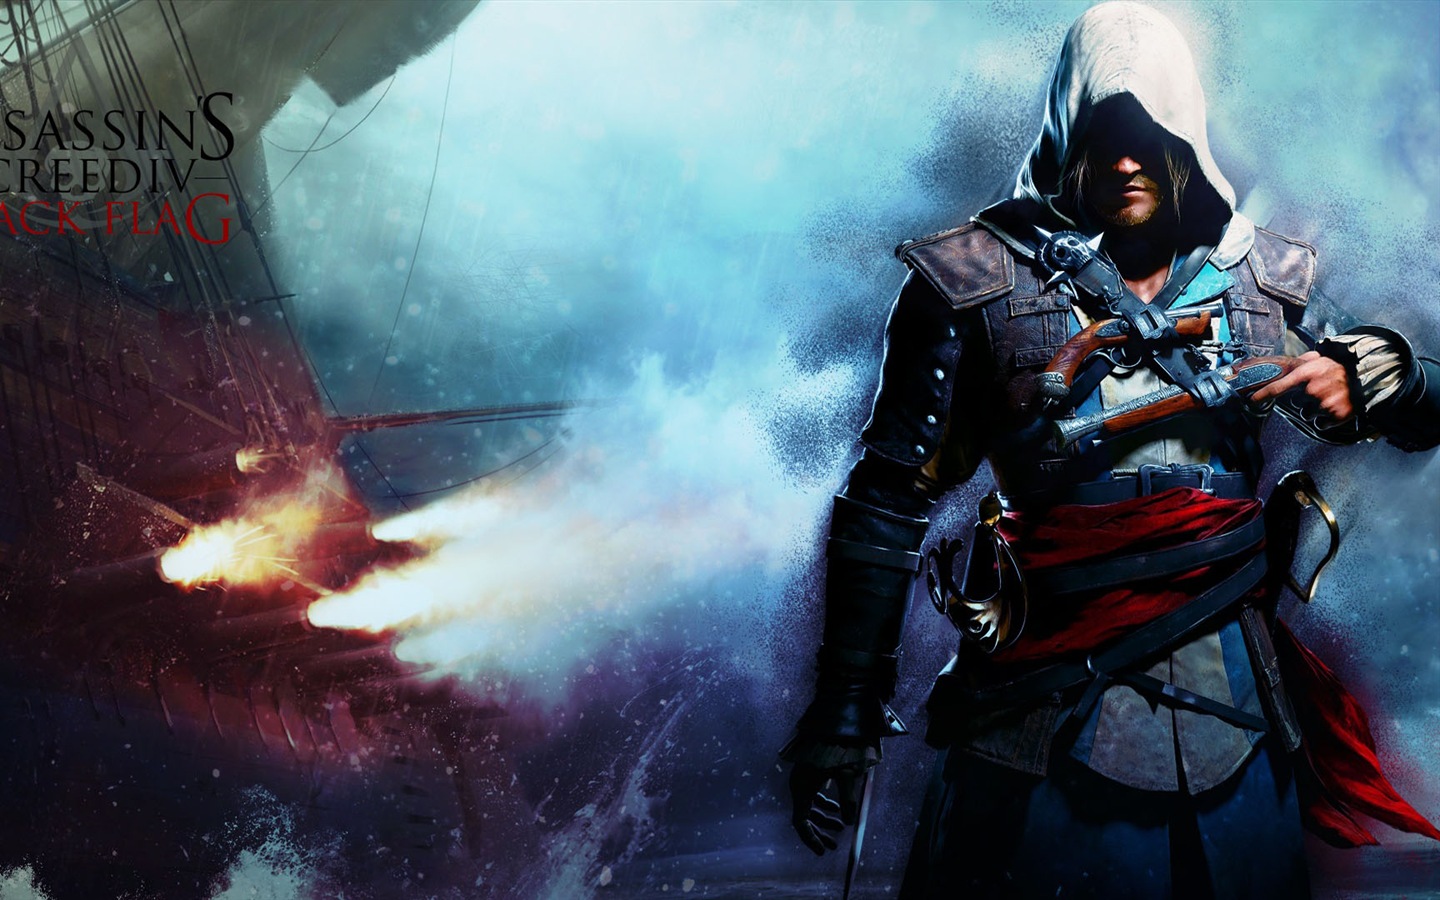 Creed IV Assassin: Black Flag HD wallpapers #2 - 1440x900